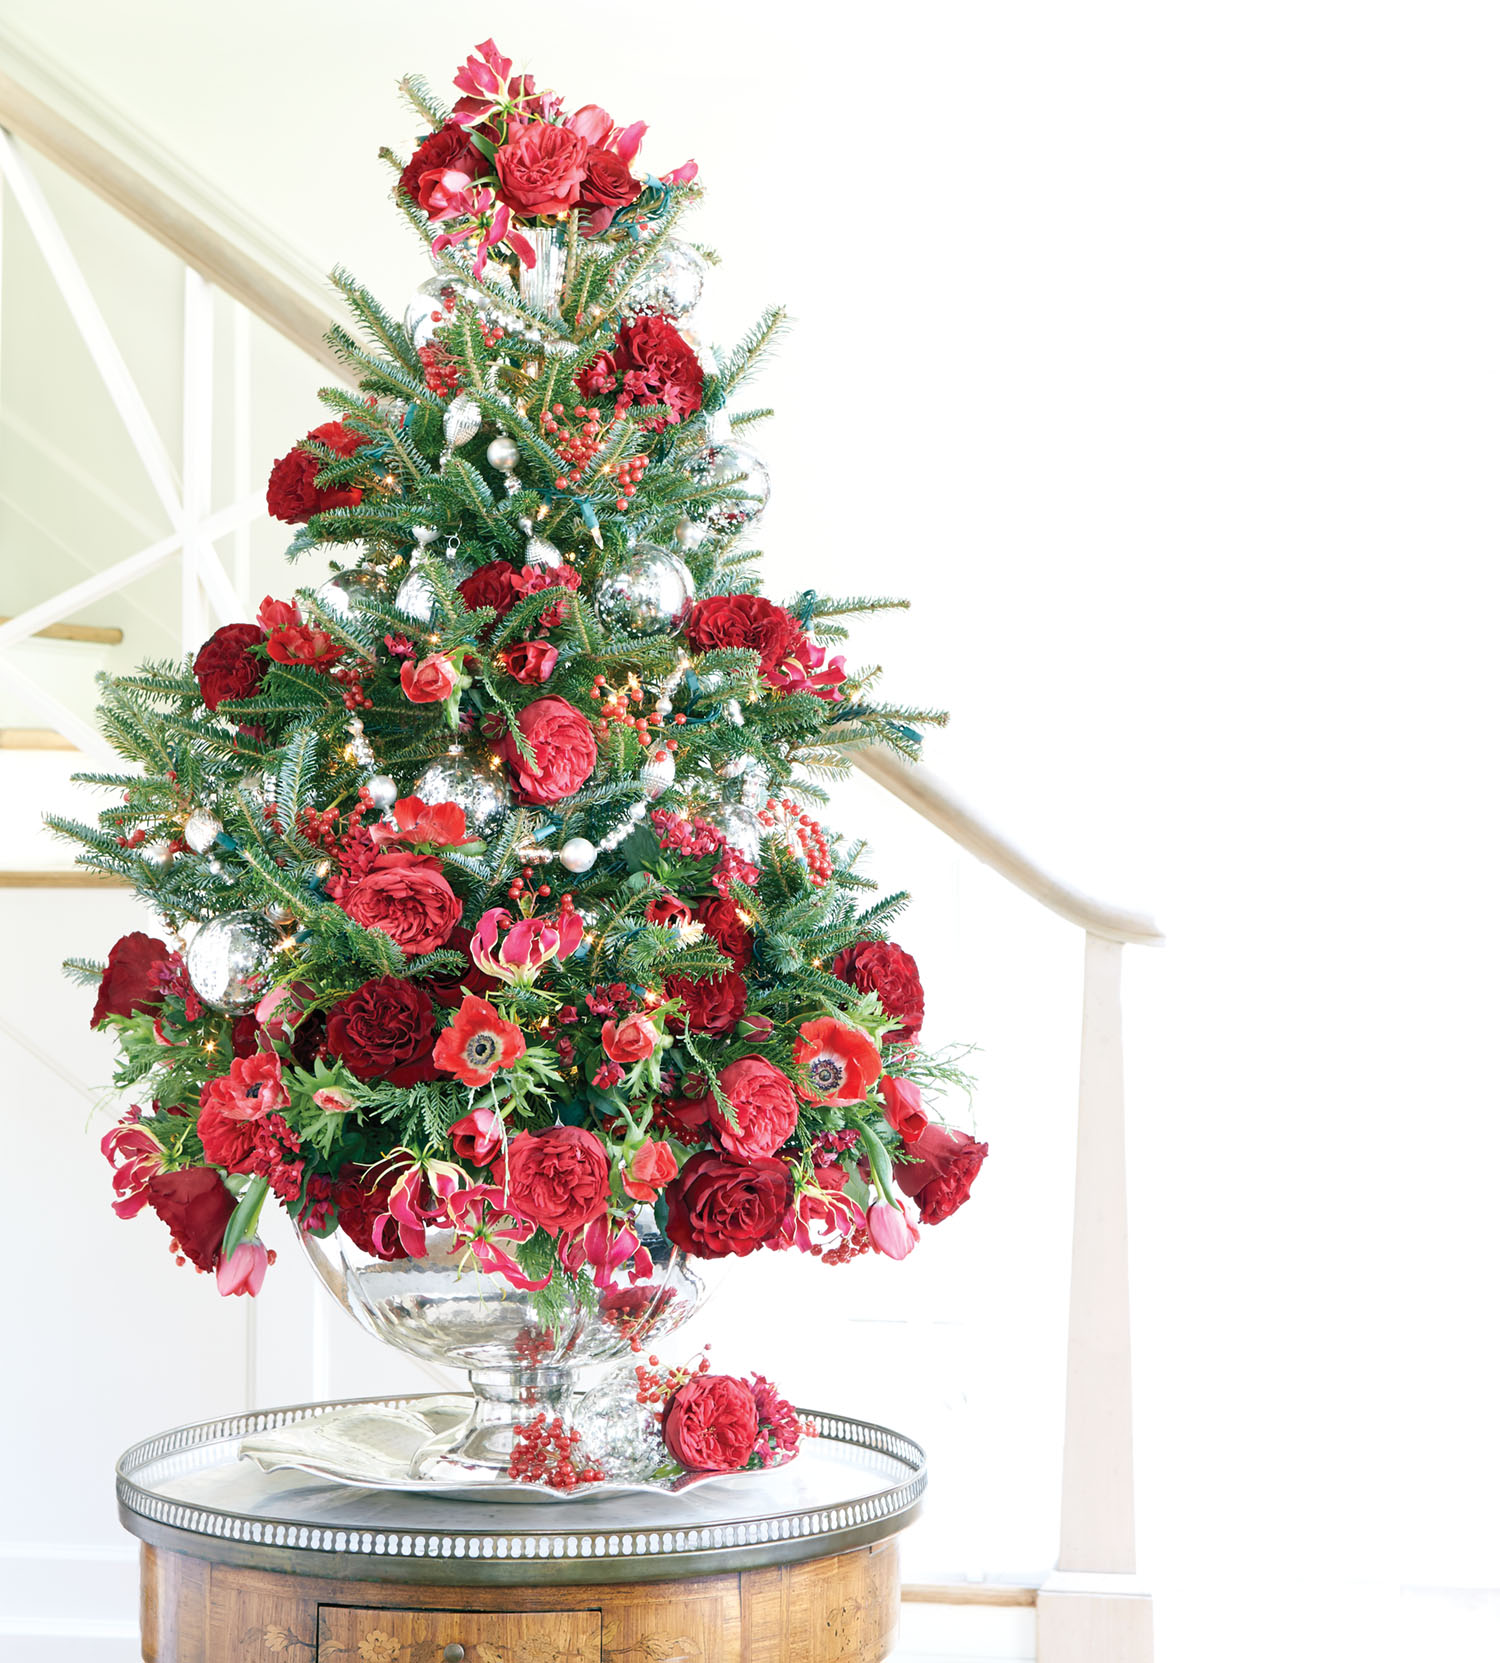 Ray Jordan's finished tabletop Christmas tree decorated with red flowers on an entry table.